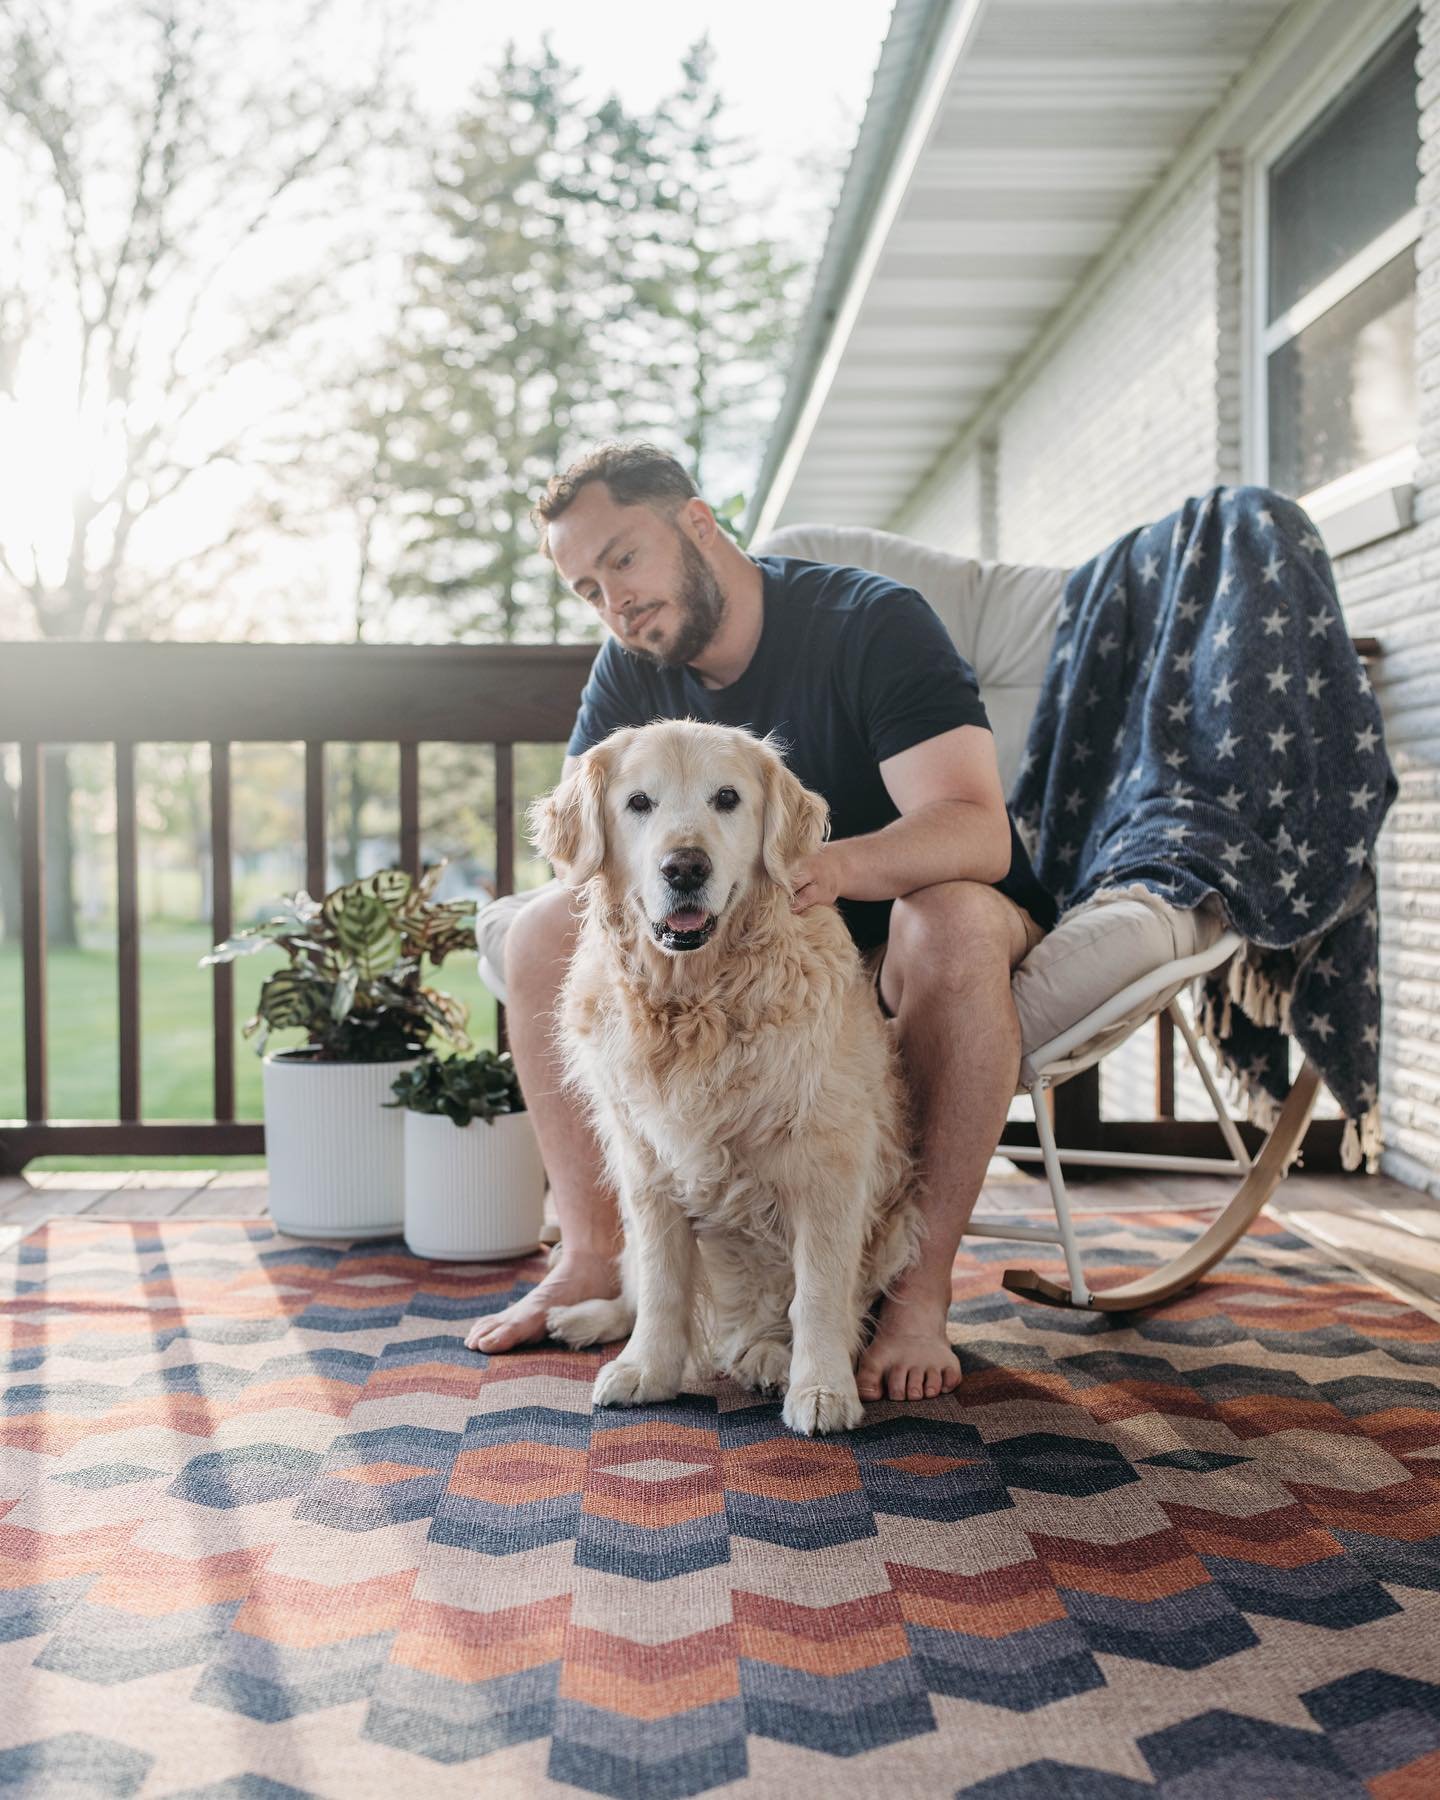 It&rsquo;s patio season, and we&rsquo;re so obsessed with the upgrade our @ruggable Re-Jute Rug gives our space! #ruggablepartner

I love to change up the spaces in our home quite frequently to celebrate each season, and having three very messy retri